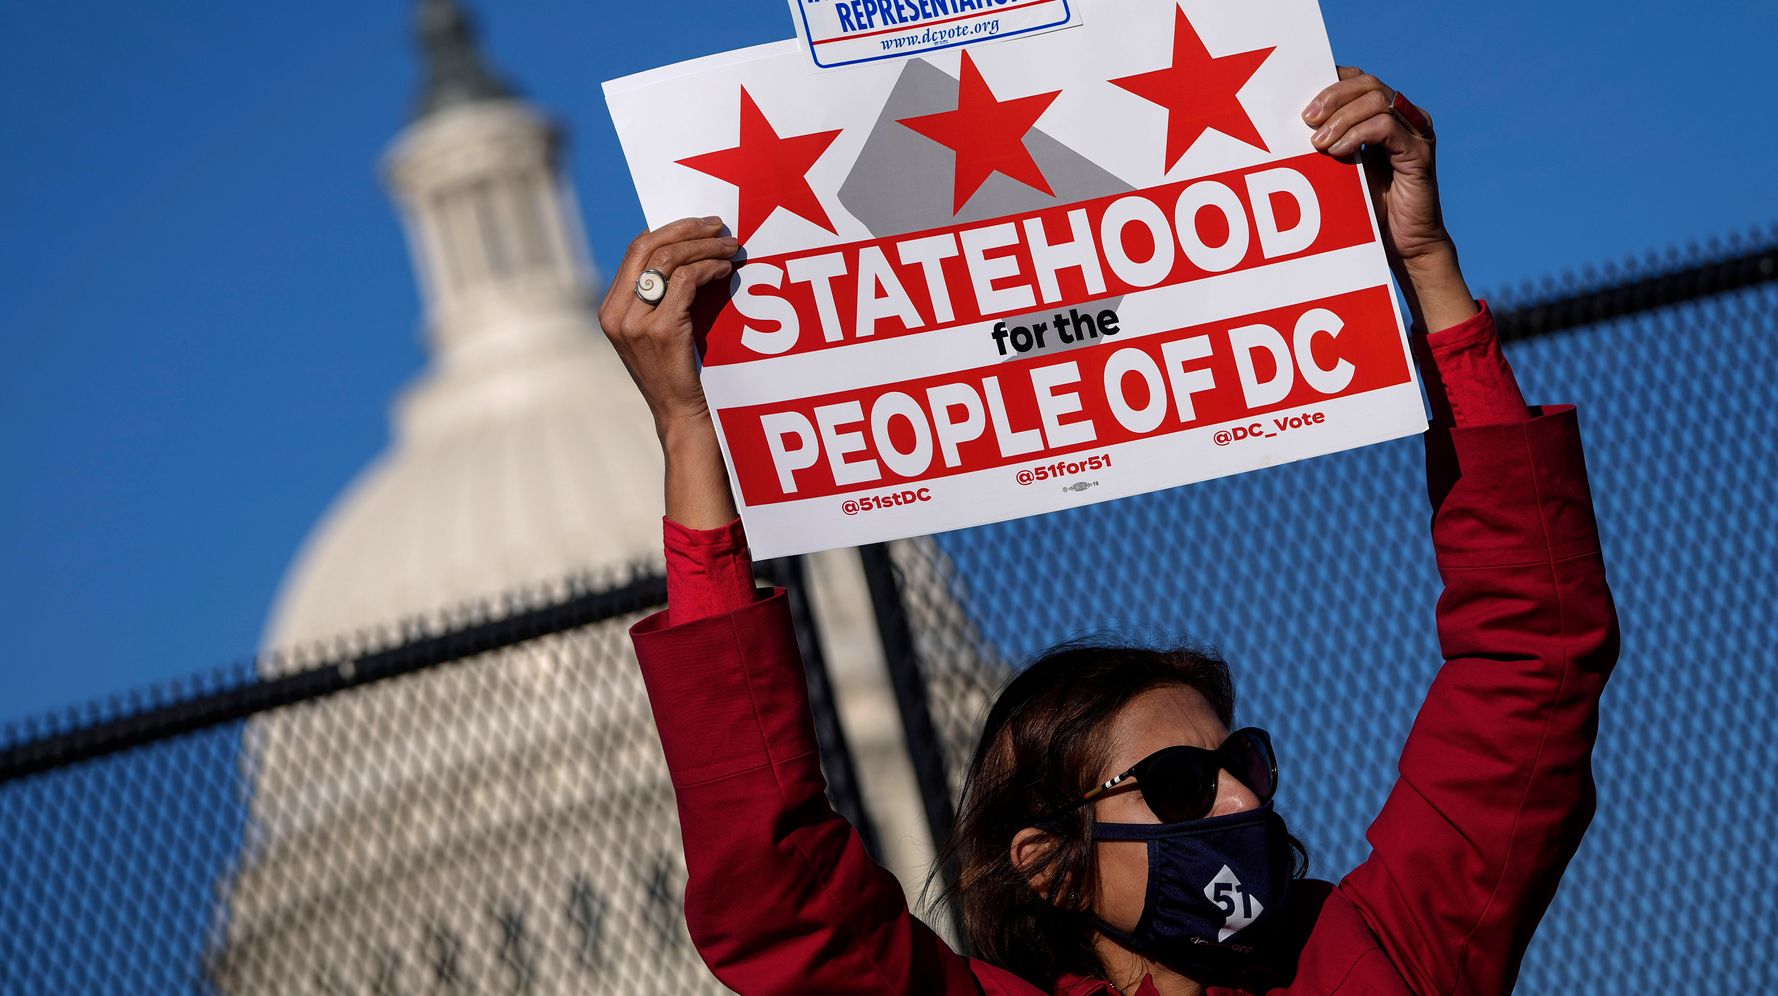 House Votes To Make D.C. The 51st State